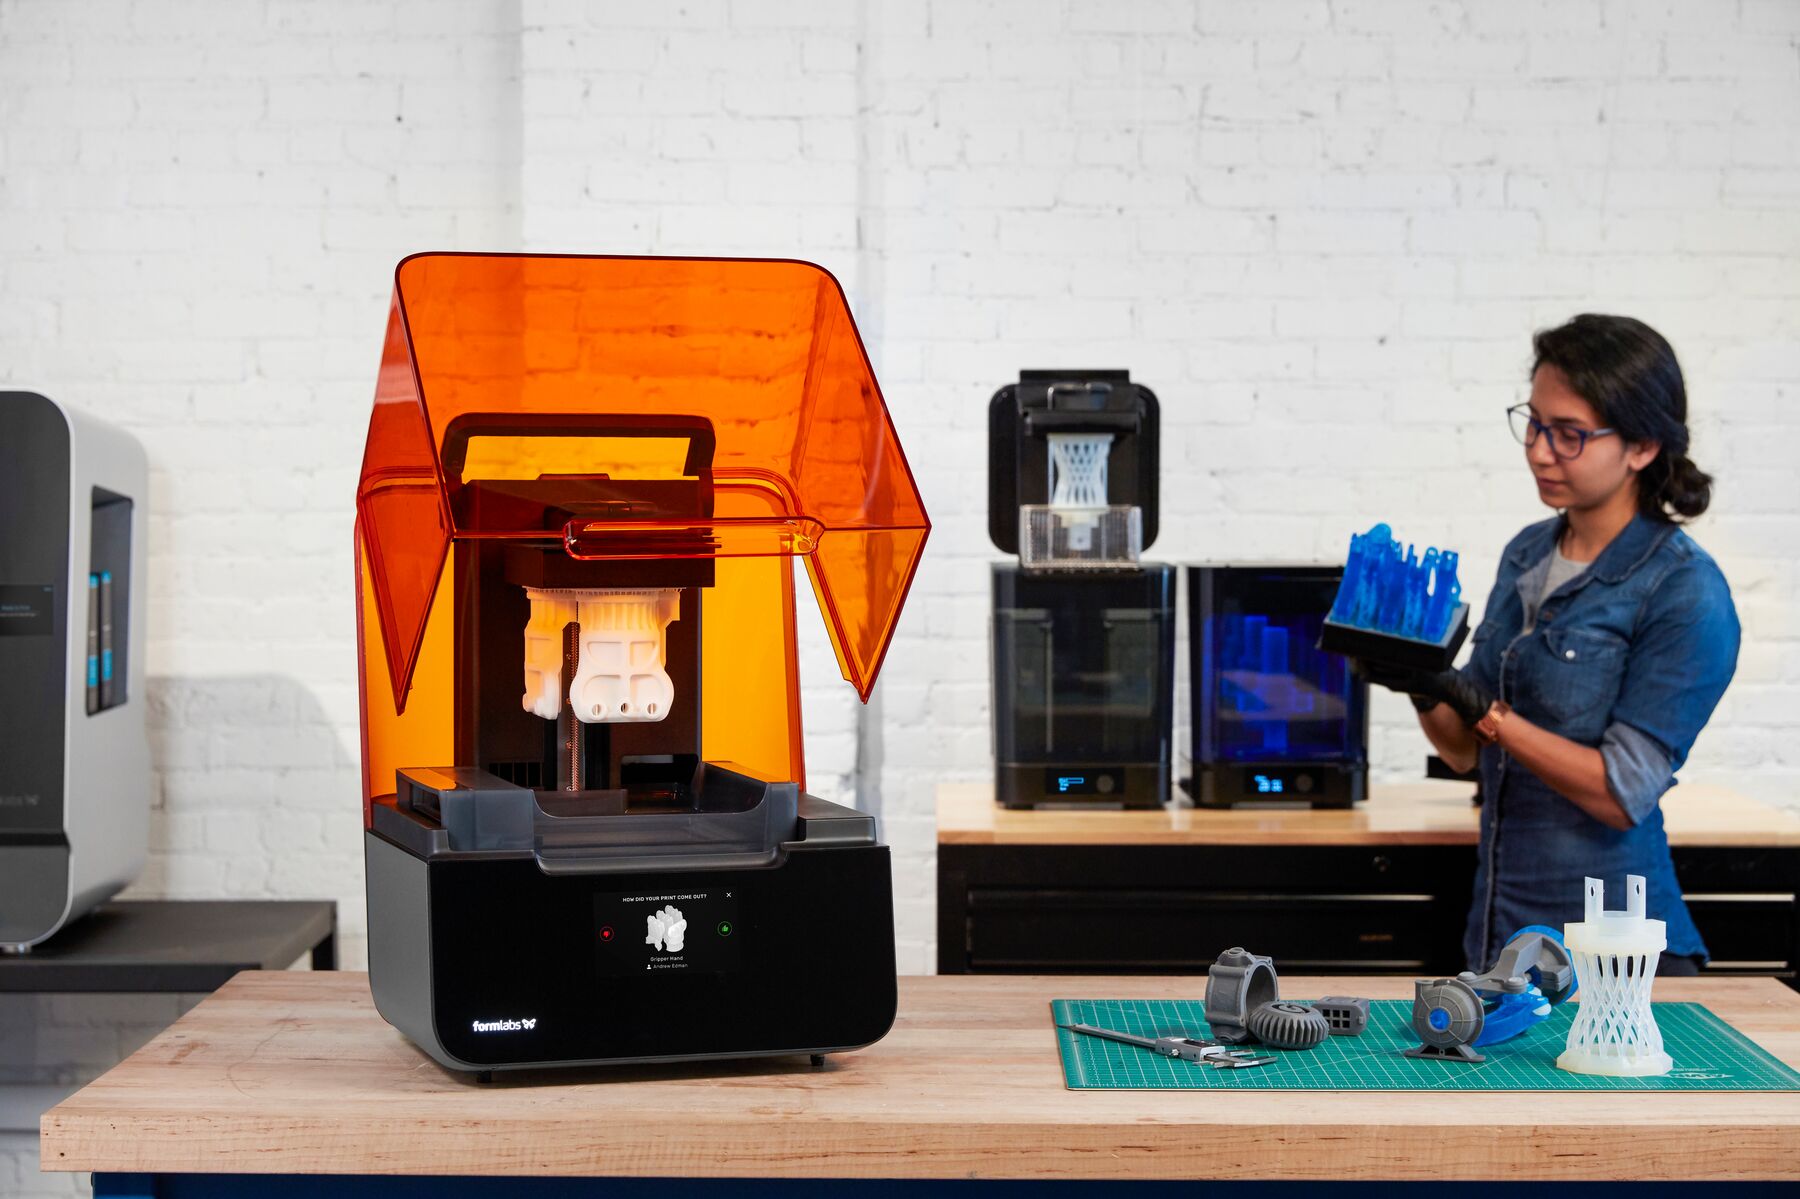 Image shows the SLA ecosystem from Formlabs with 3D printer, washing and curing machines